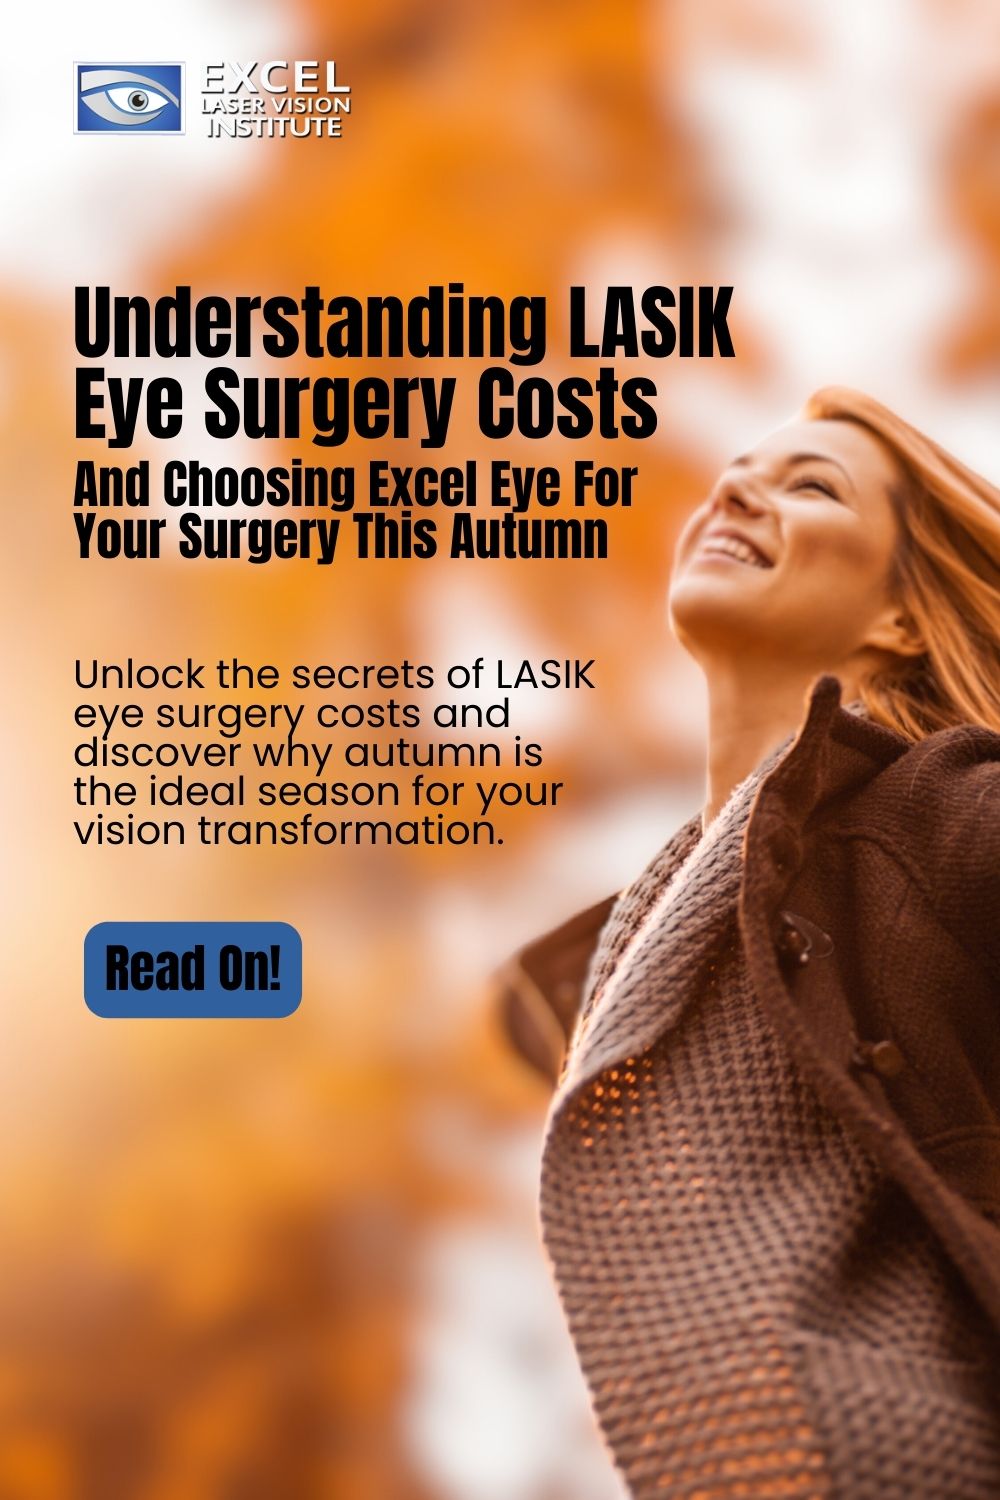 lasik-eye-surgery-cost-and-the-benefits-of-undergoing-lasik-this-autumn-in-los-angeles-Pinterest-Pin